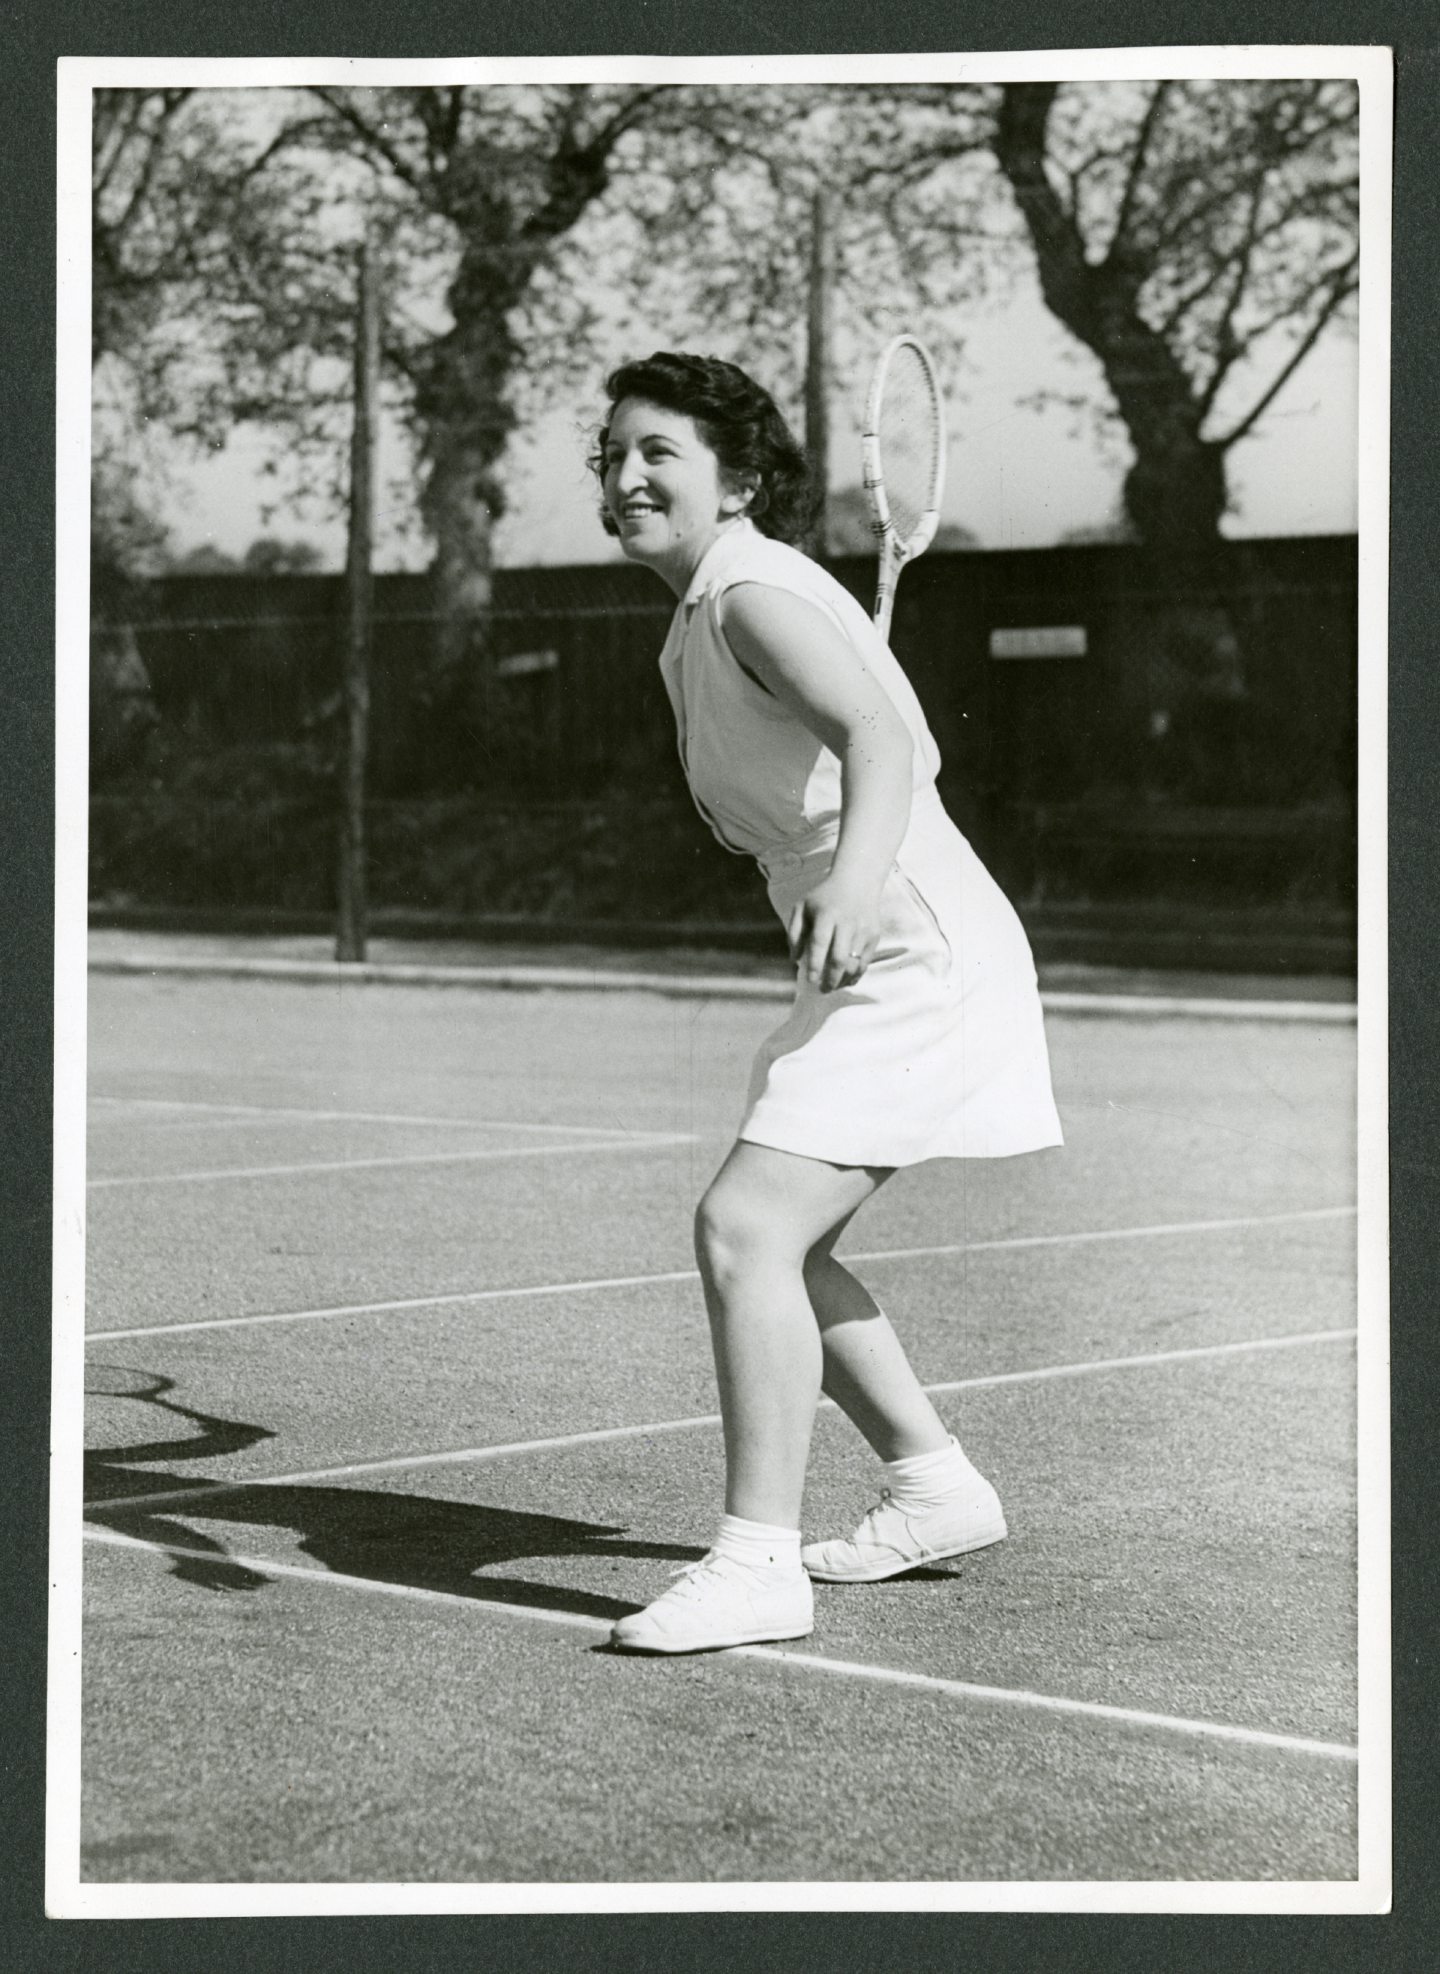 Lizana on the courts in May 1951.